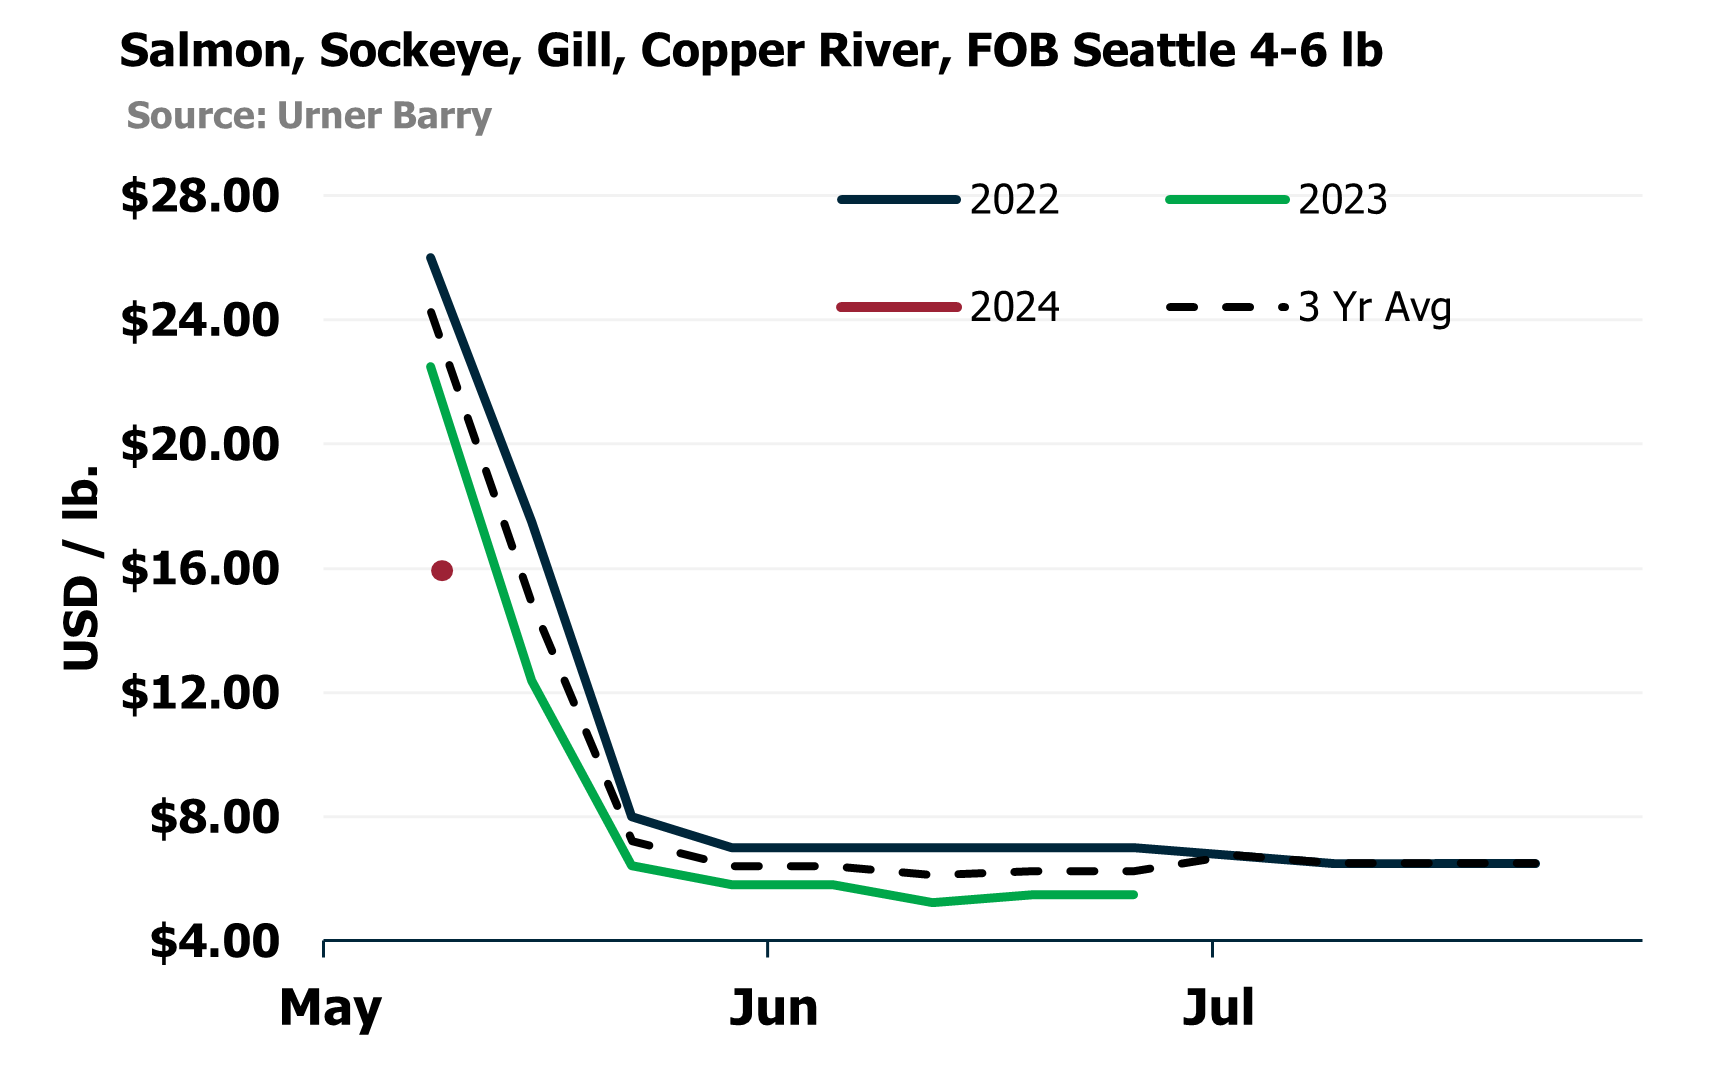 ANALYSIS: Copper River Salmon Season Opens with Strong Sockeye Landings and Lower Initial Pricing